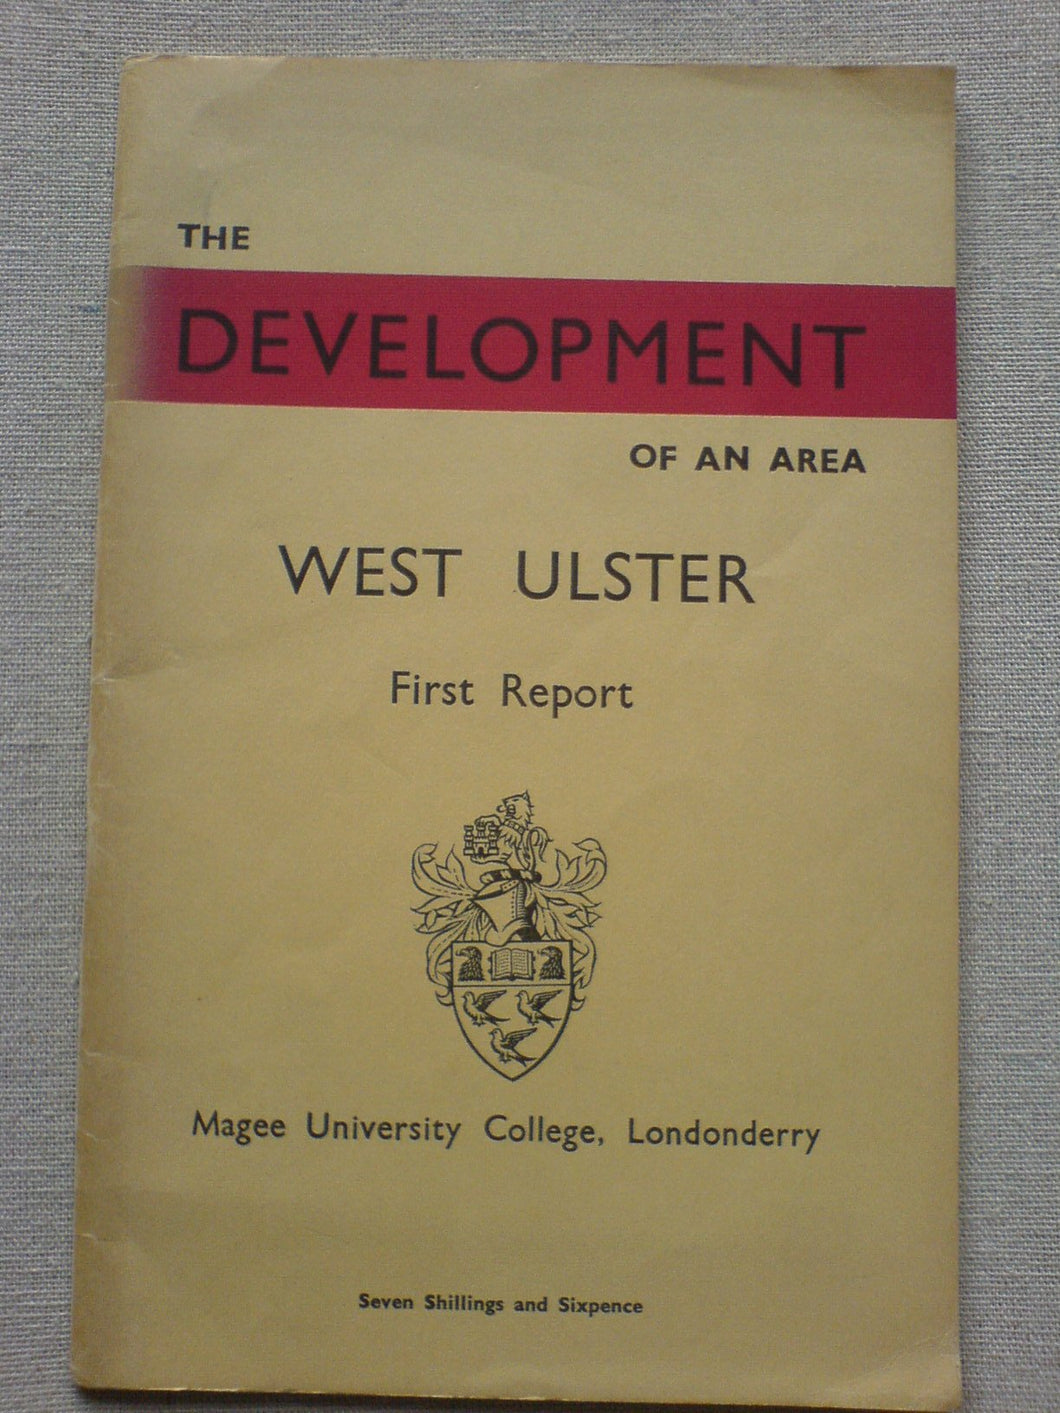 The Development of an Area - West Ulster - First Report